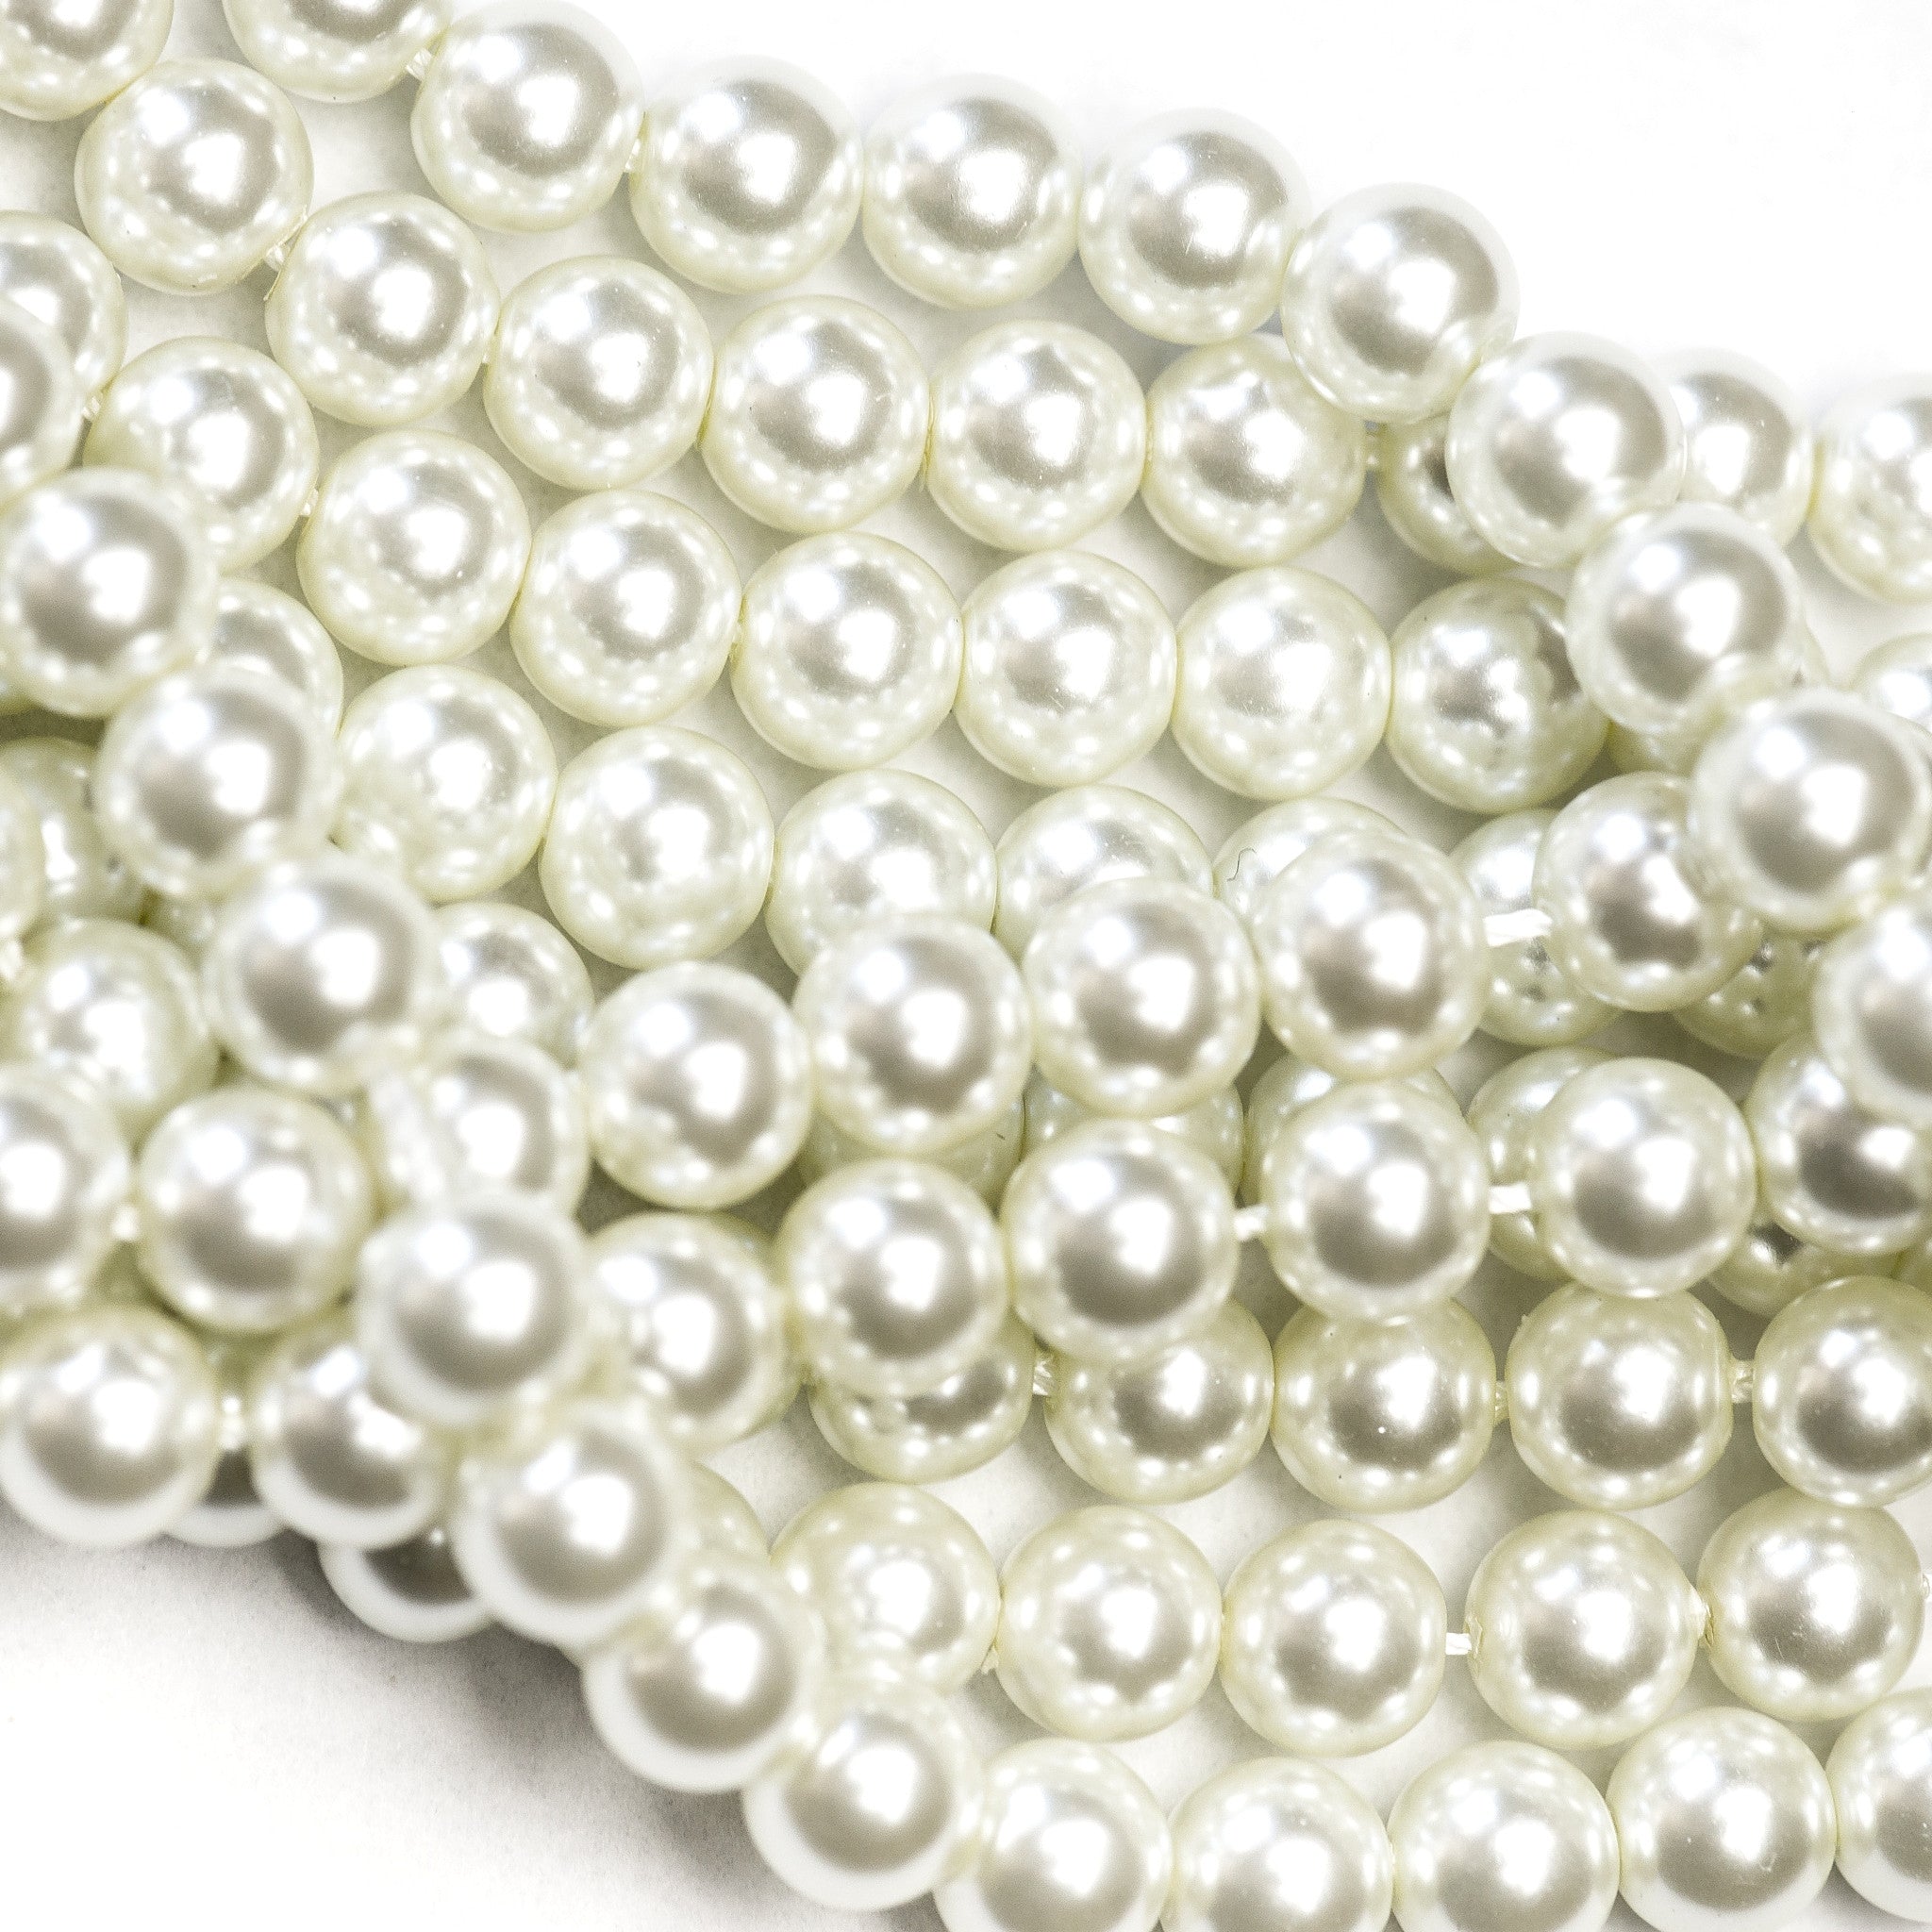 White Glass Pearl Beads – 4mm – 50 Count – The Ornament Girl's Market